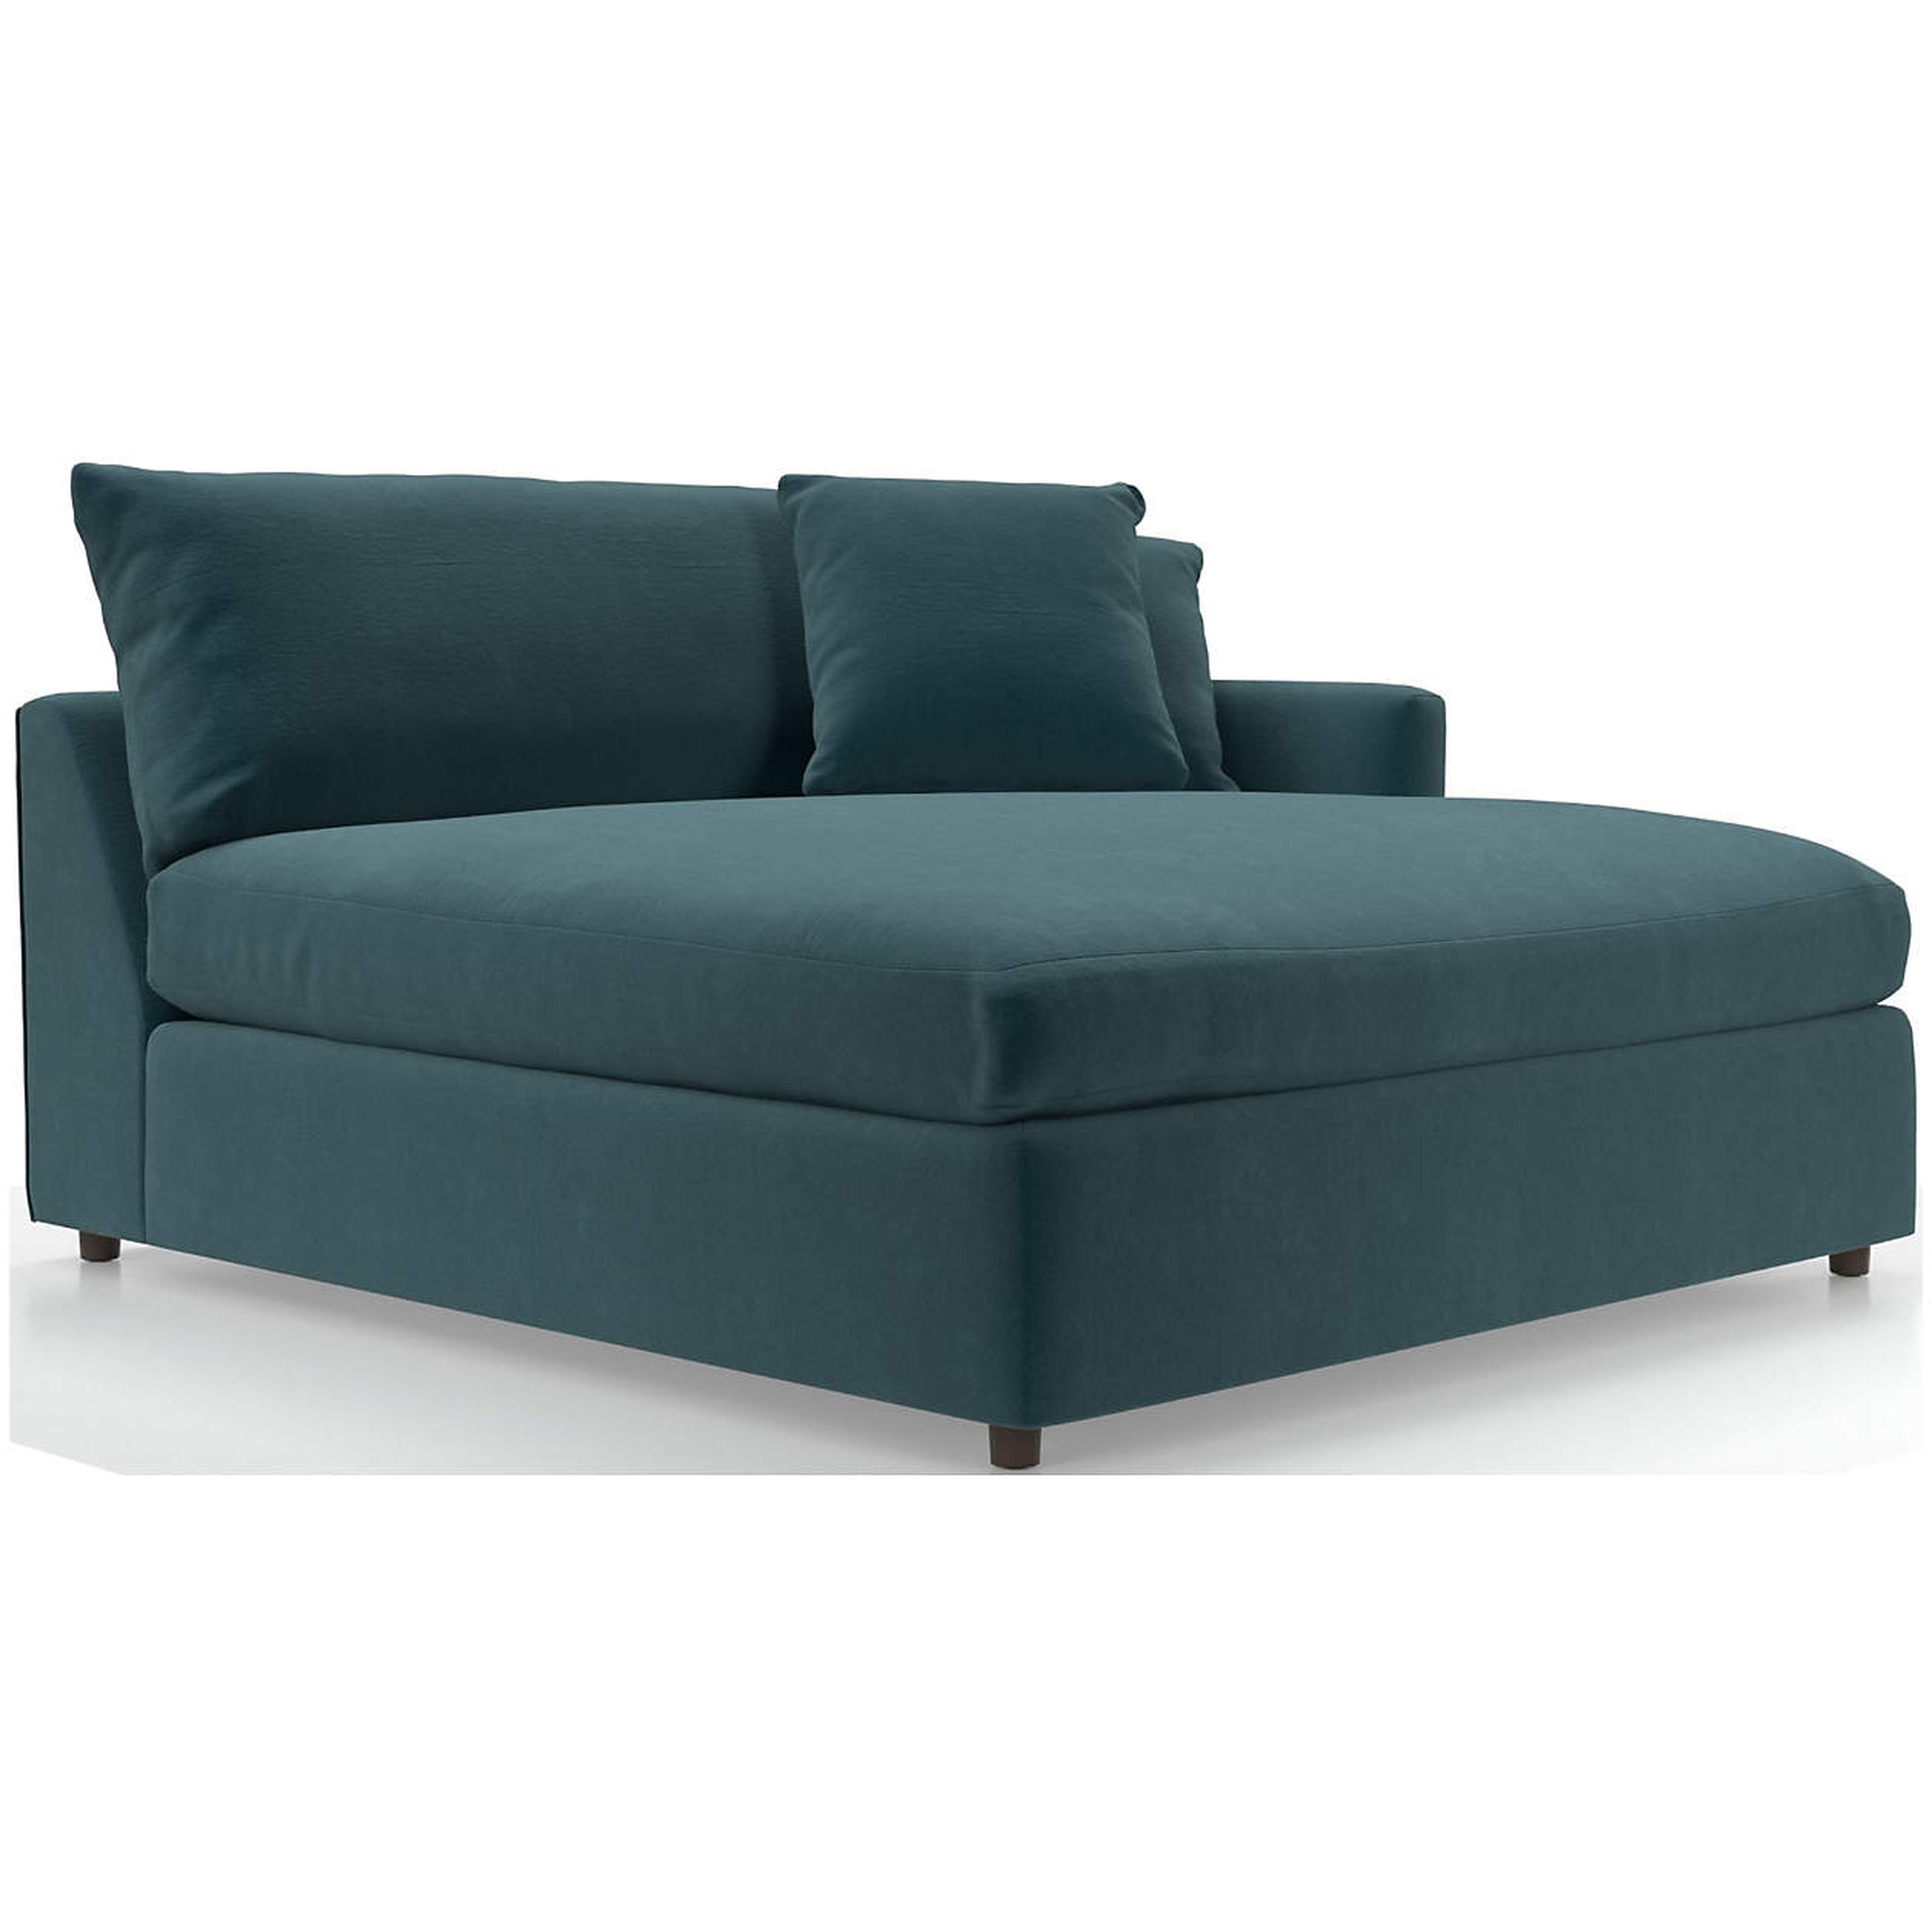 Lounge Deep Right Arm Double Chaise - Crate and Barrel